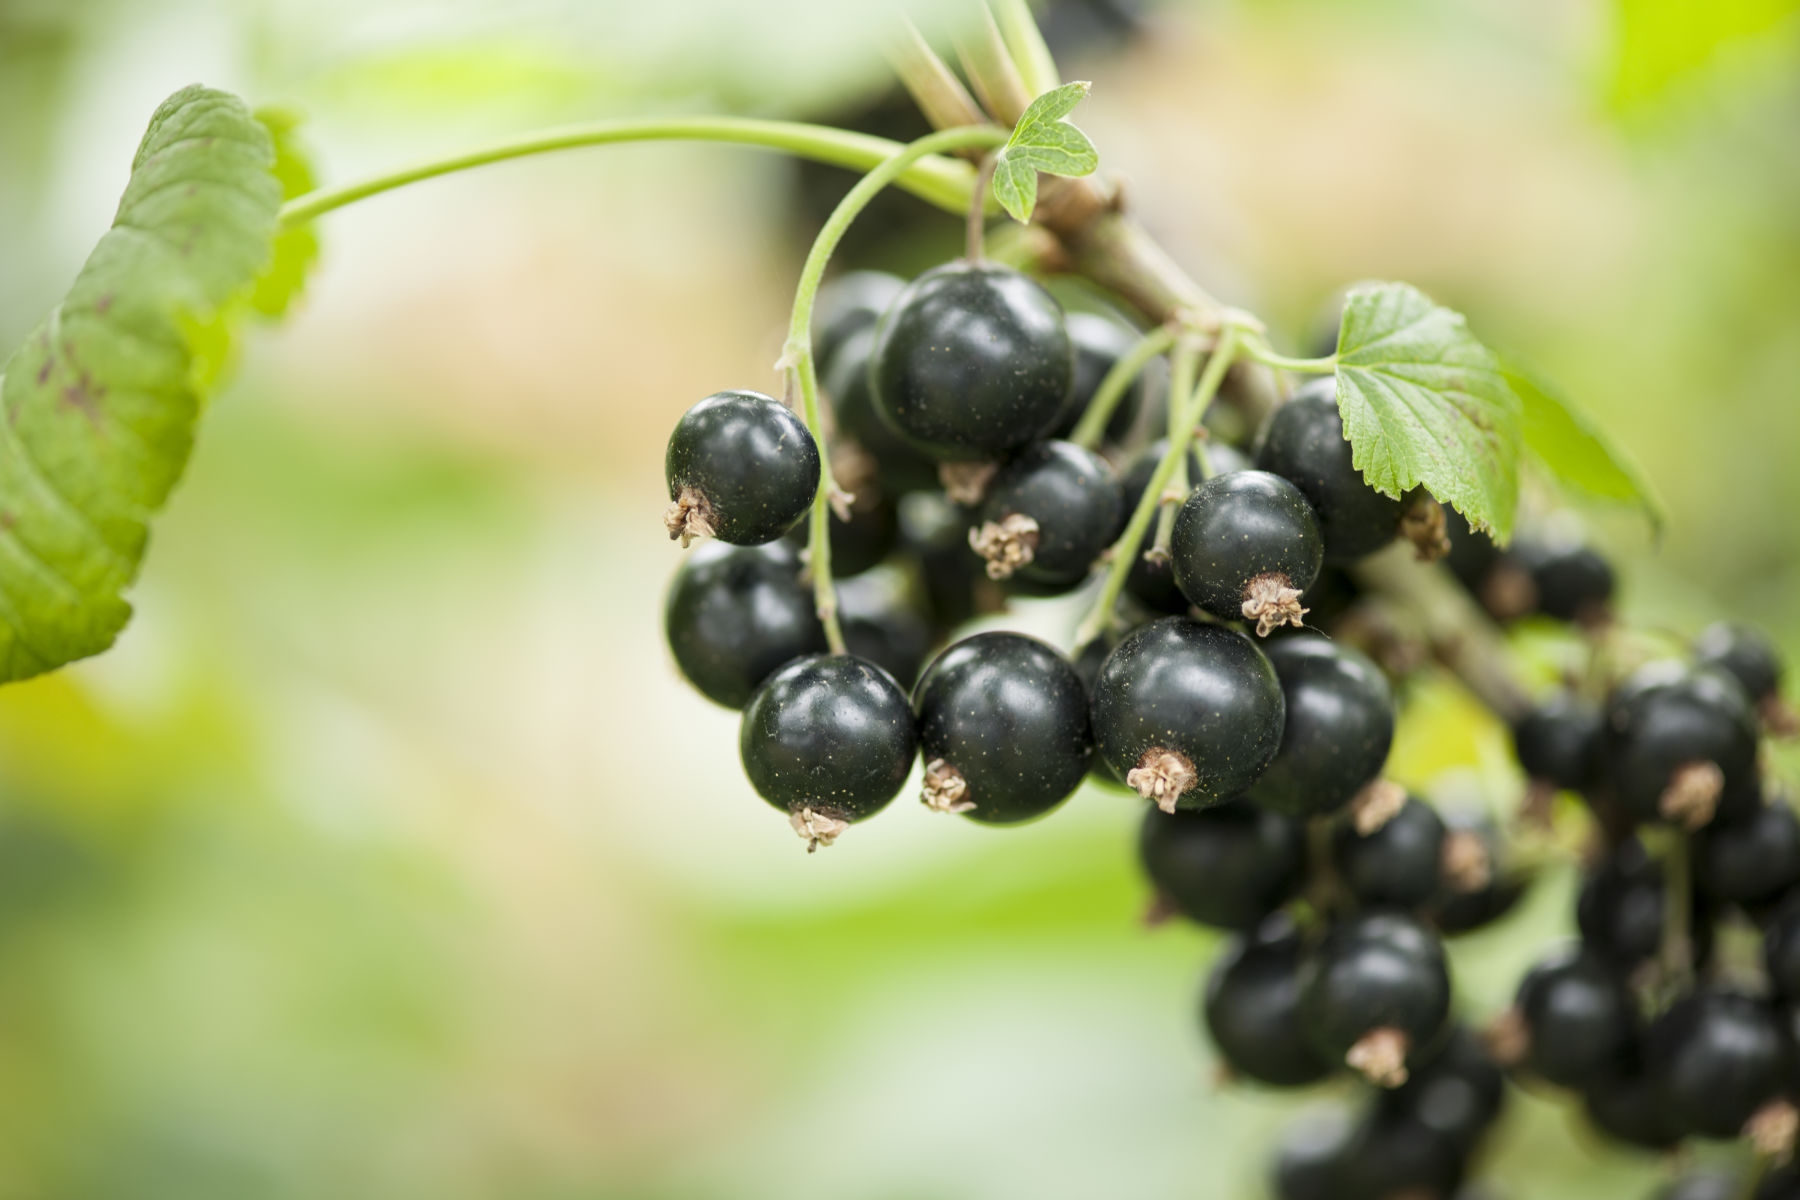 Could consuming New Zealand blackcurrants be enough to earn an Olympic medal?